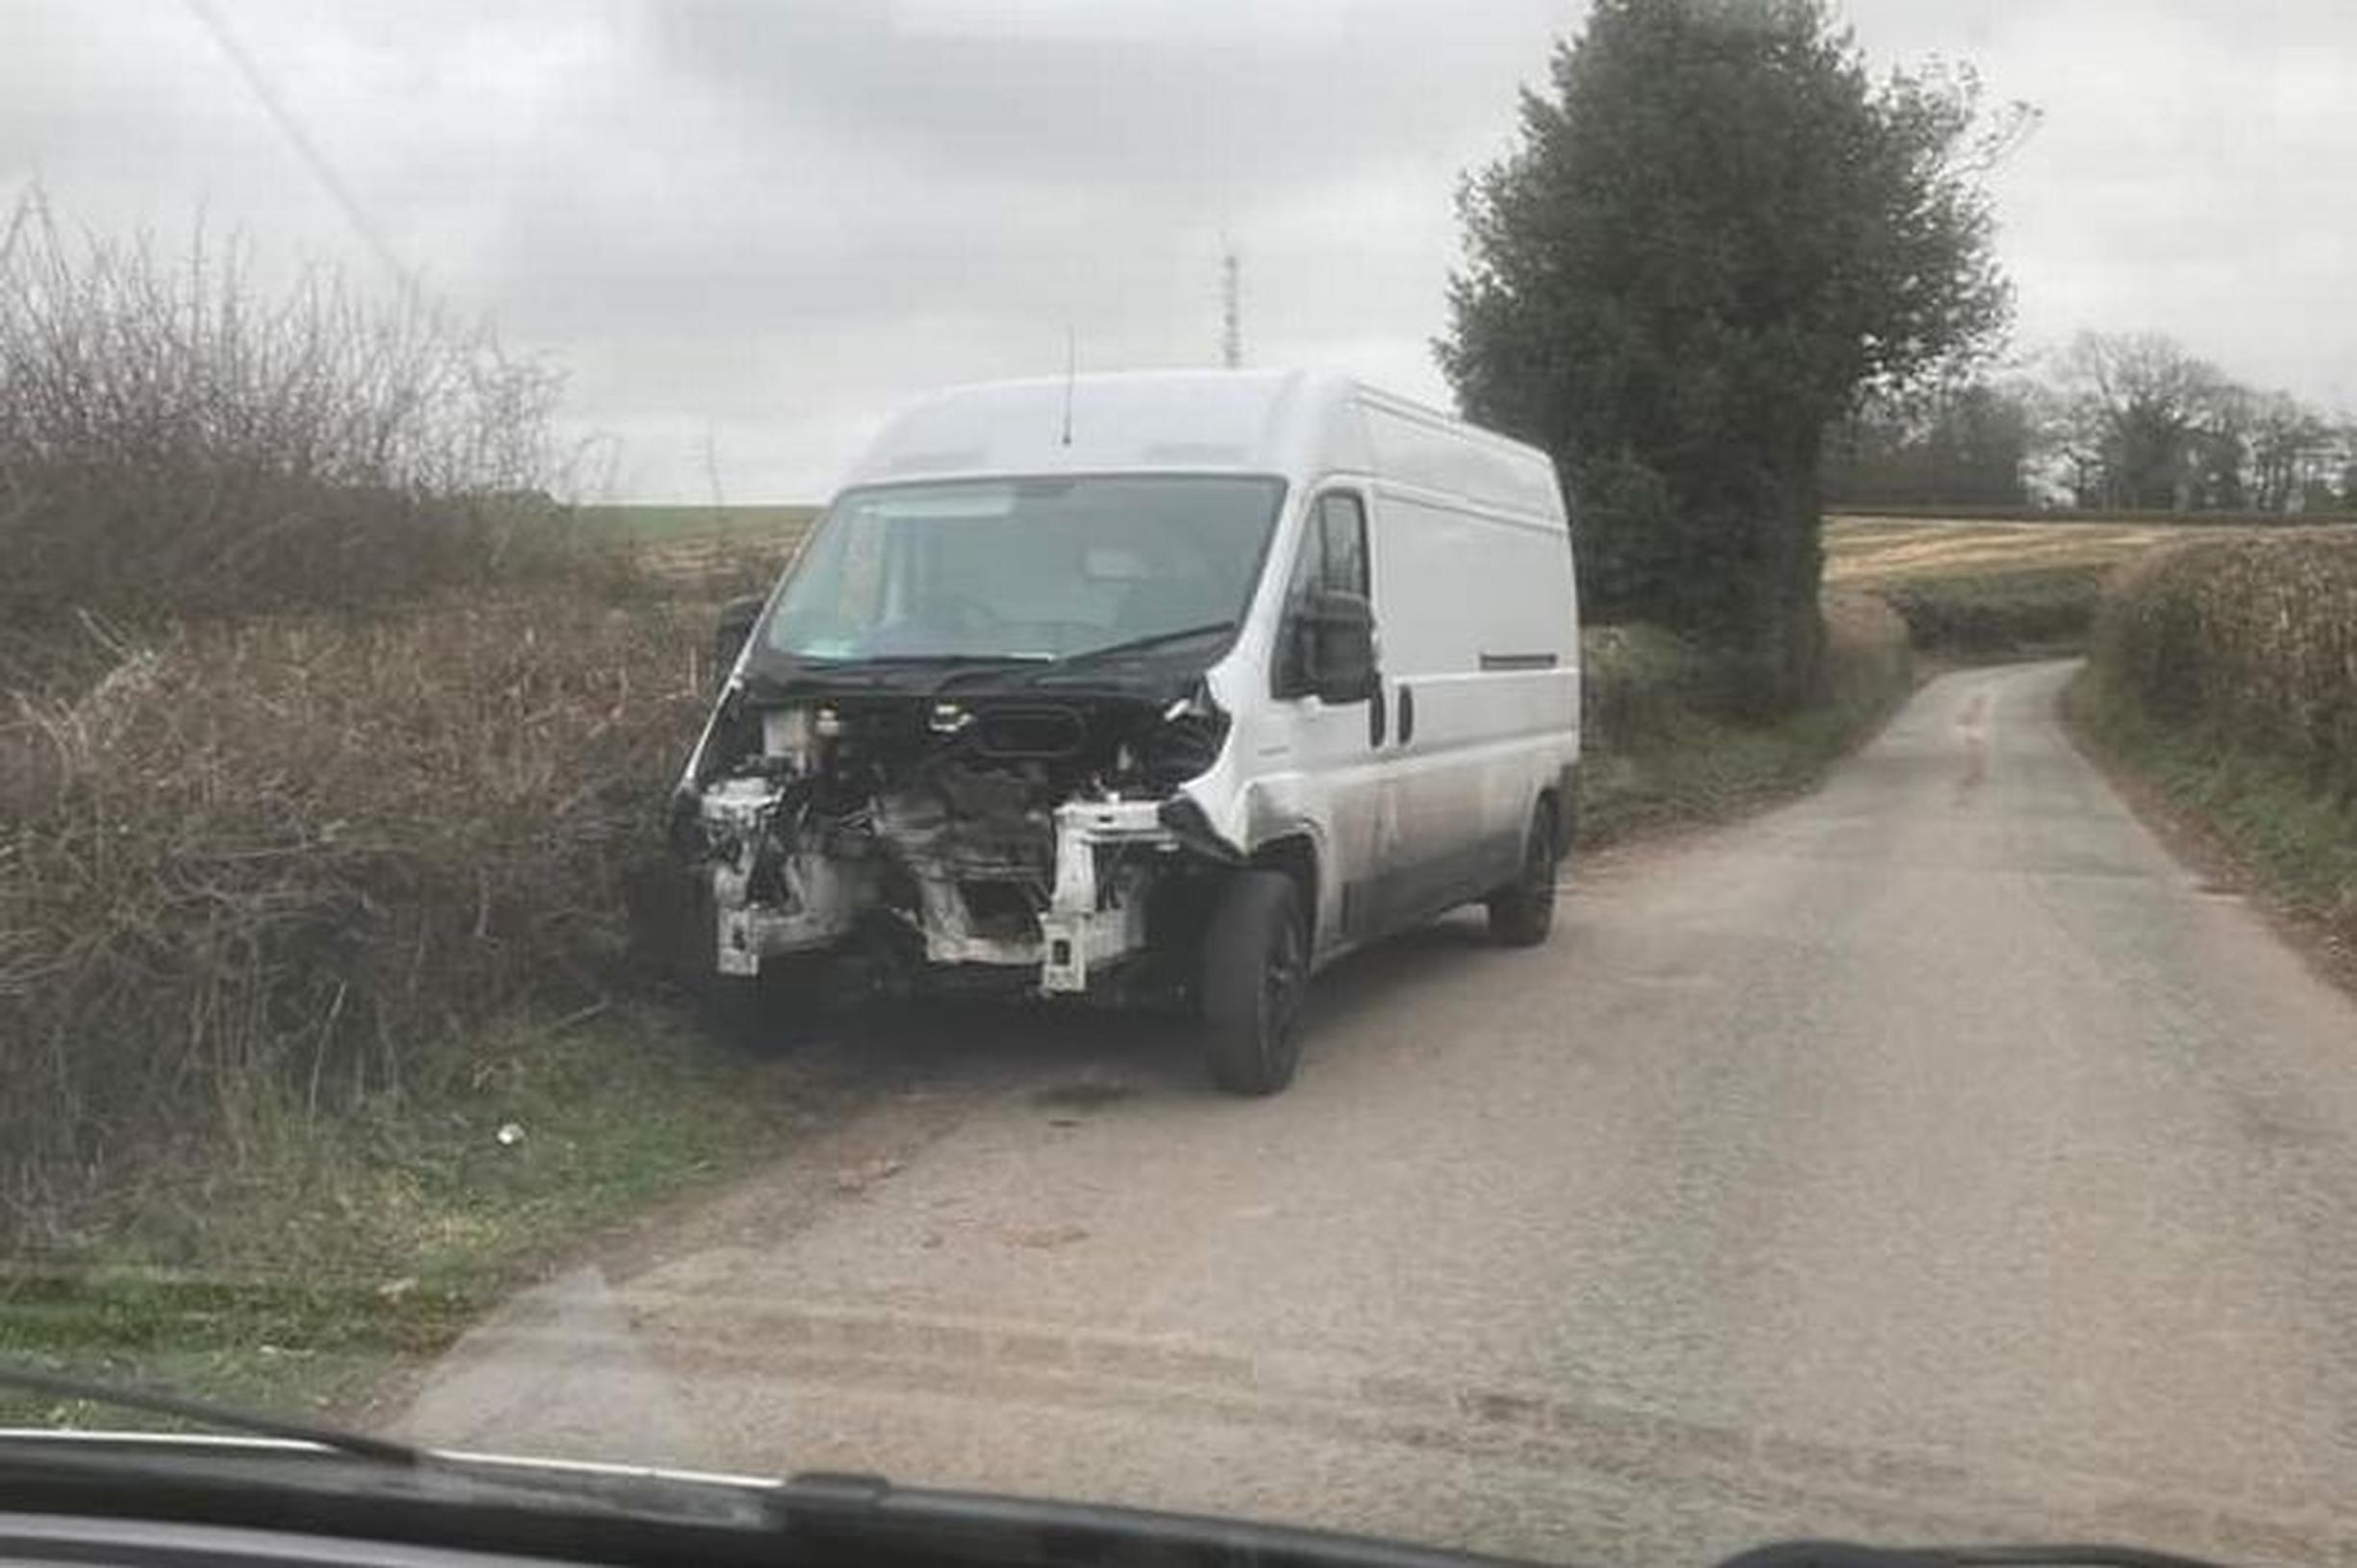 Pictures shared by Atherstone and Coleshill Police show the front of the white van destroyed and discarded on the village lane.